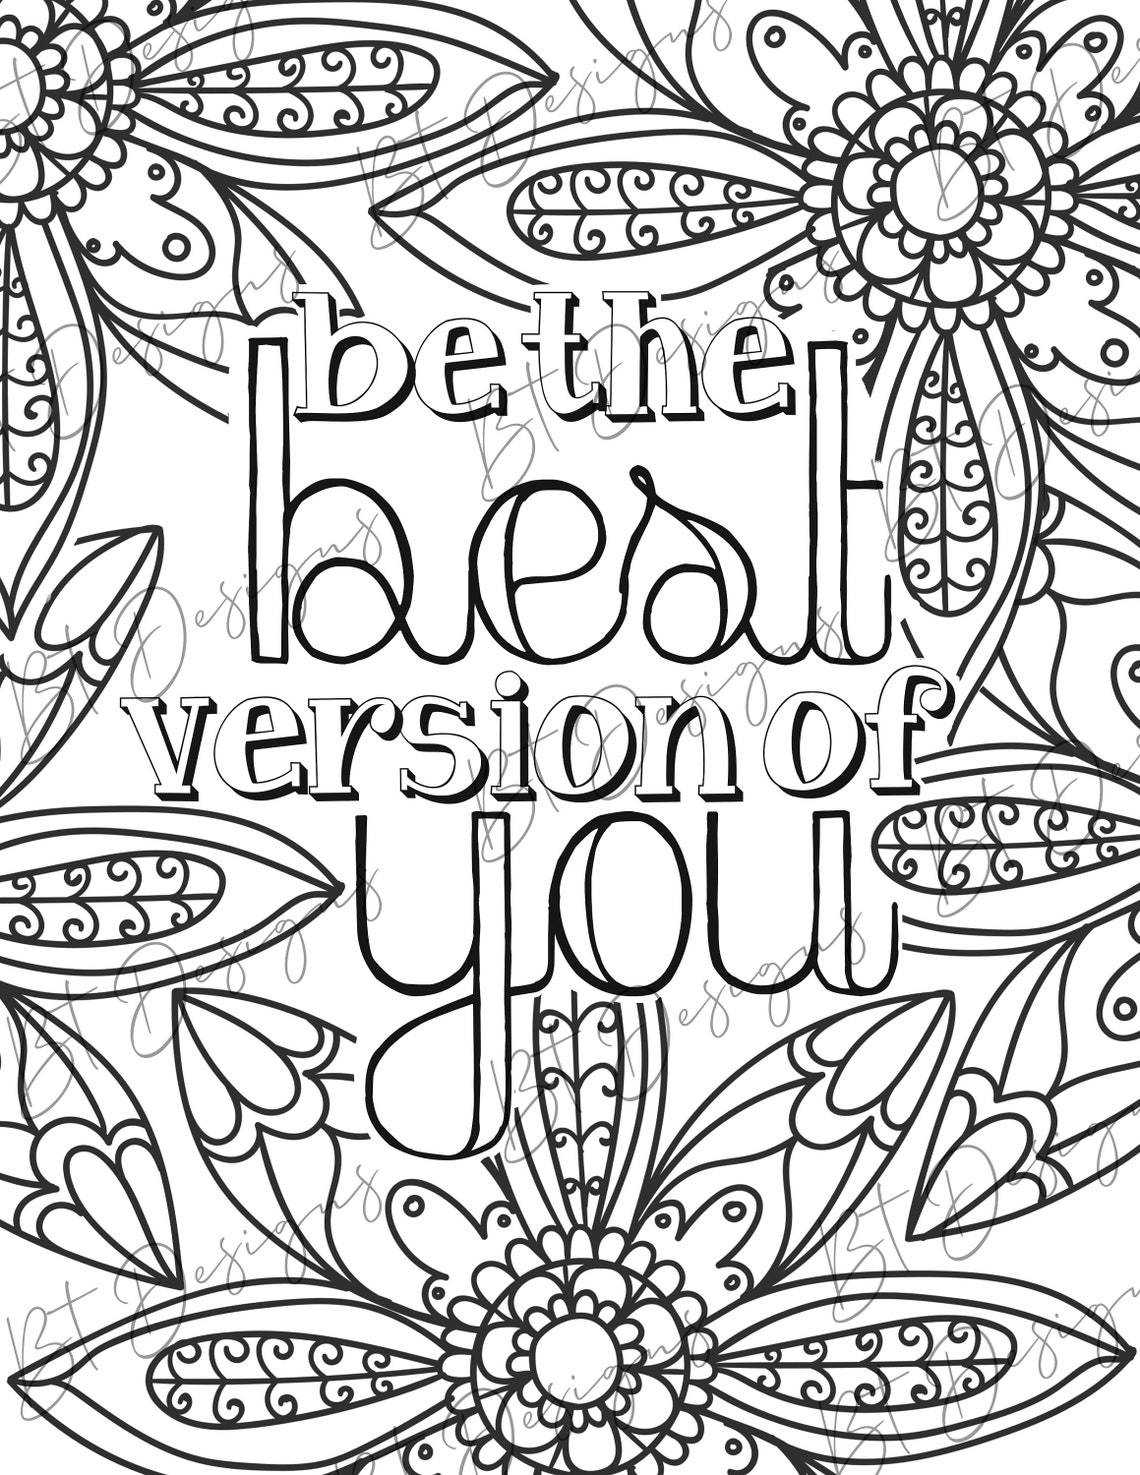 INSTANT DOWNLOAD / 20 Pages of Inspirational Quote Adult Coloring Pages ...